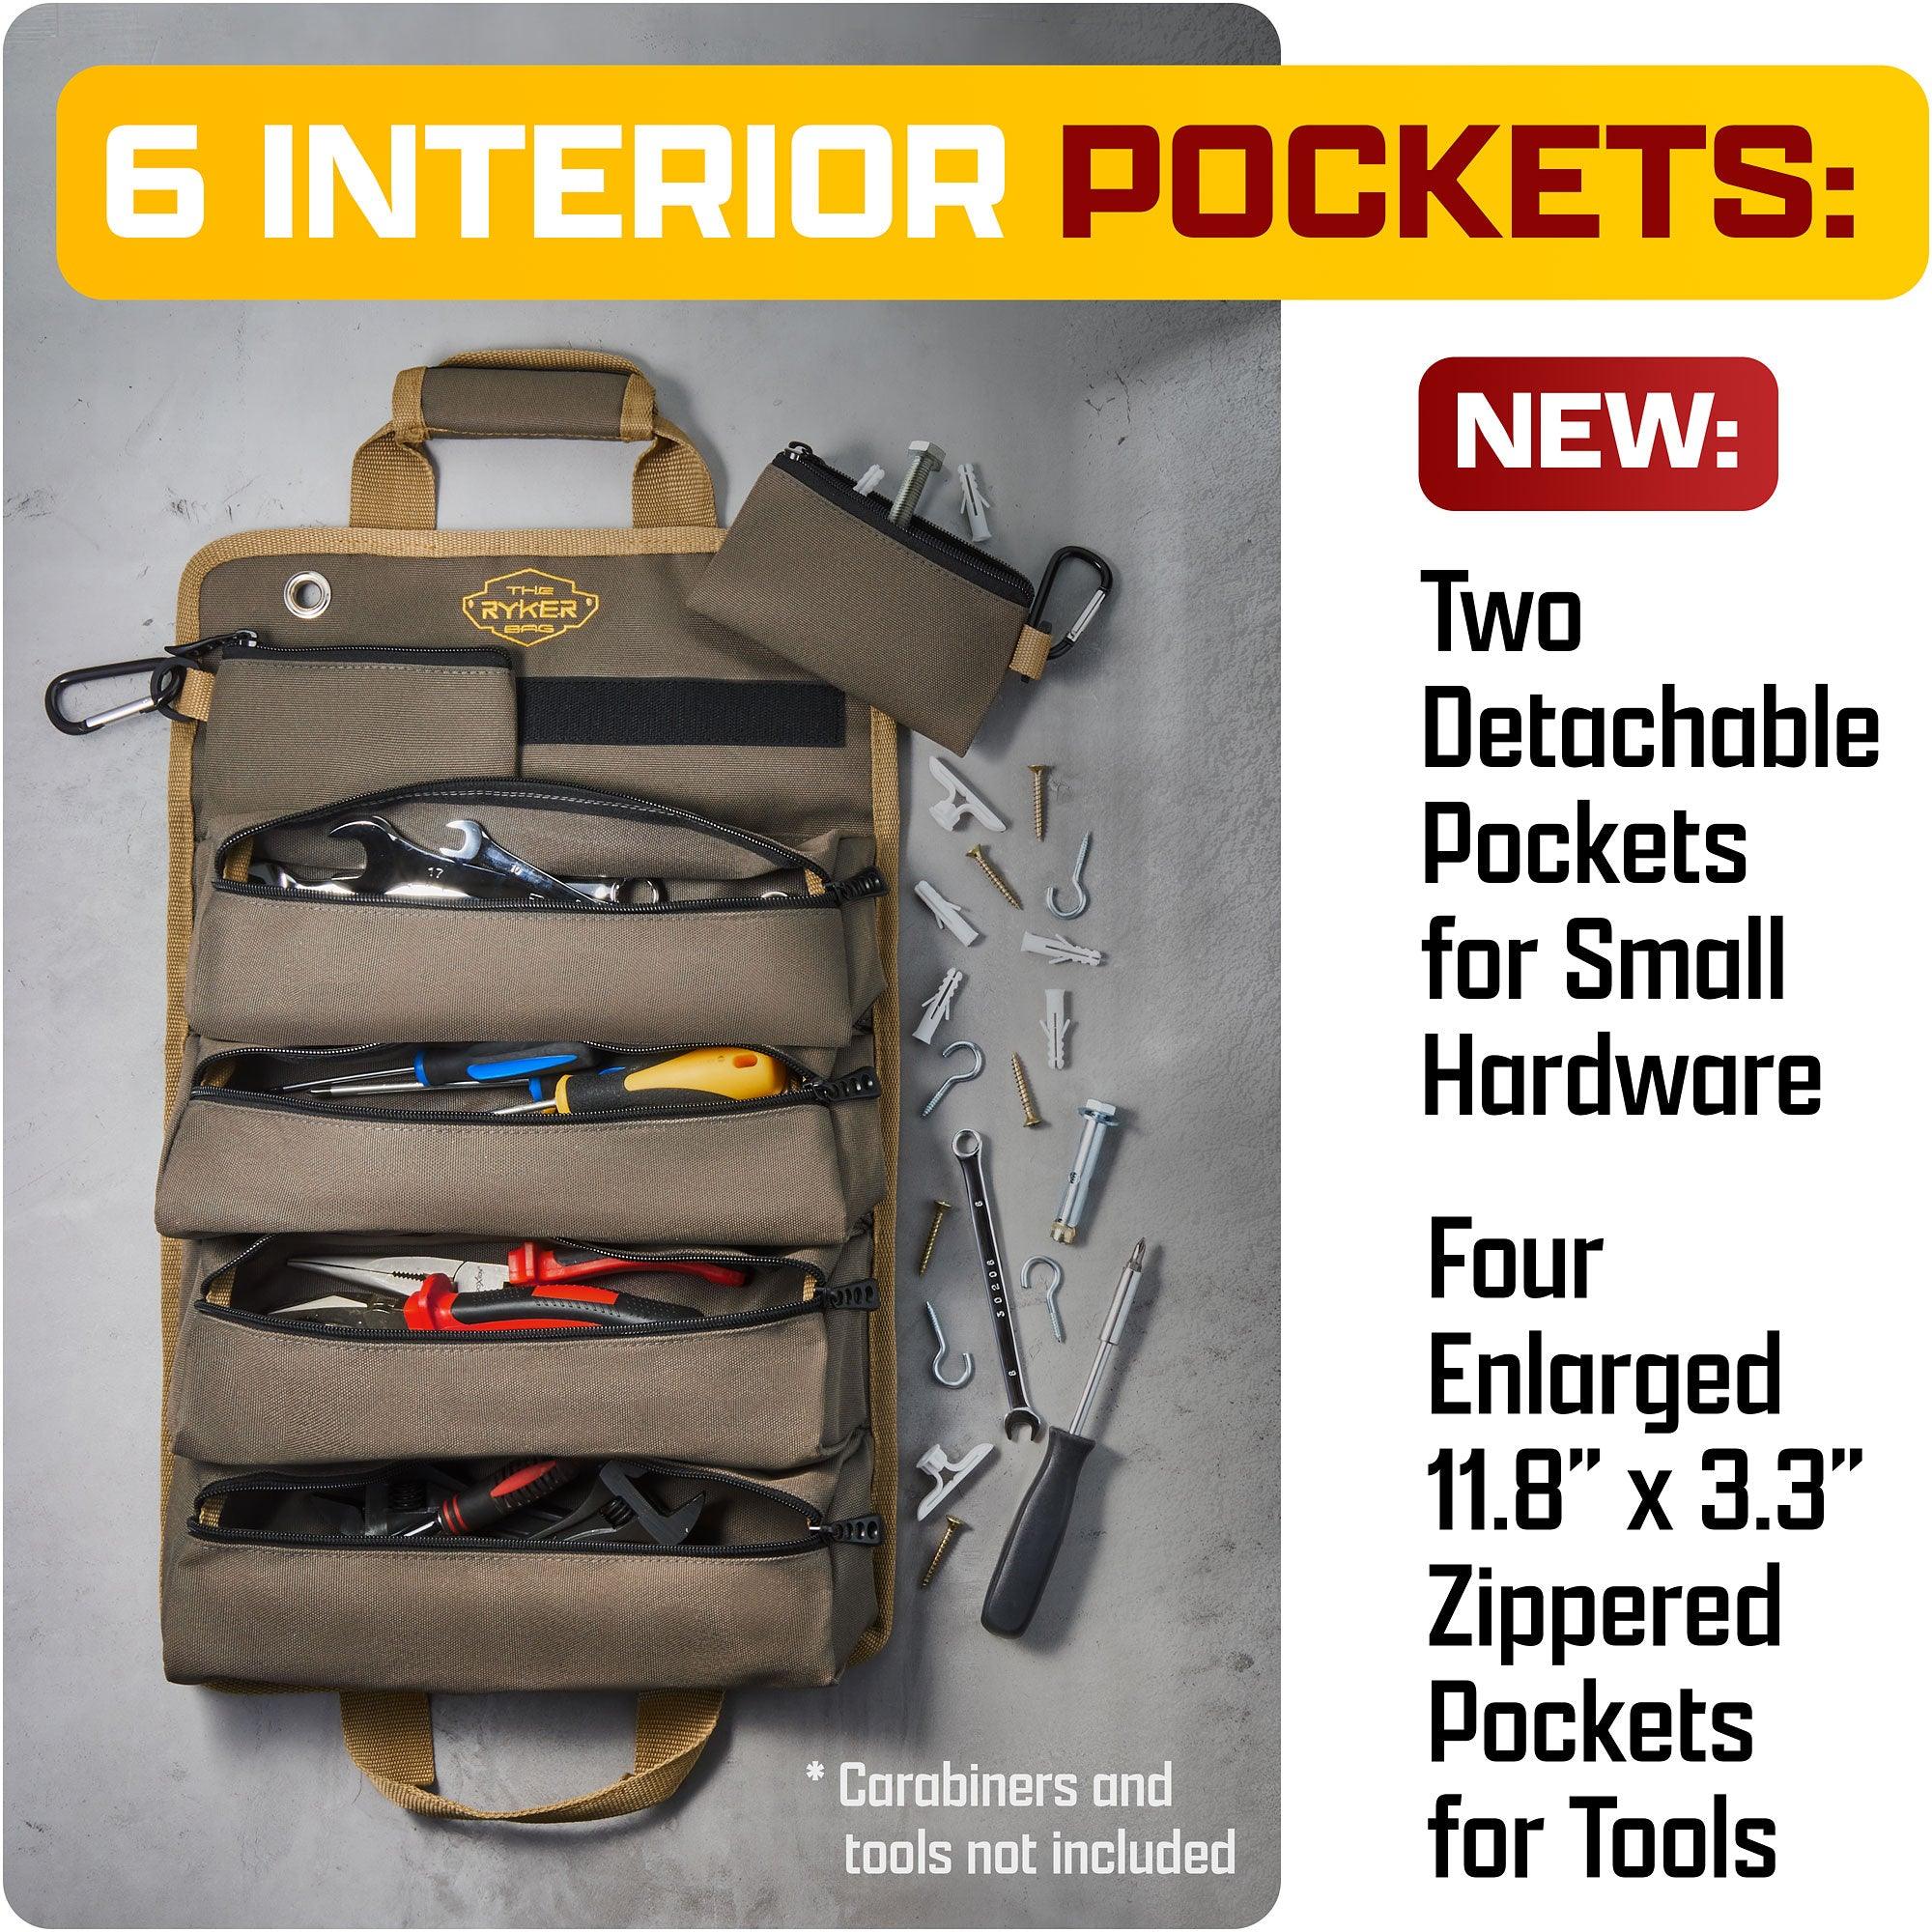 Roll-Up Tool Organizer with 6 interior pockets